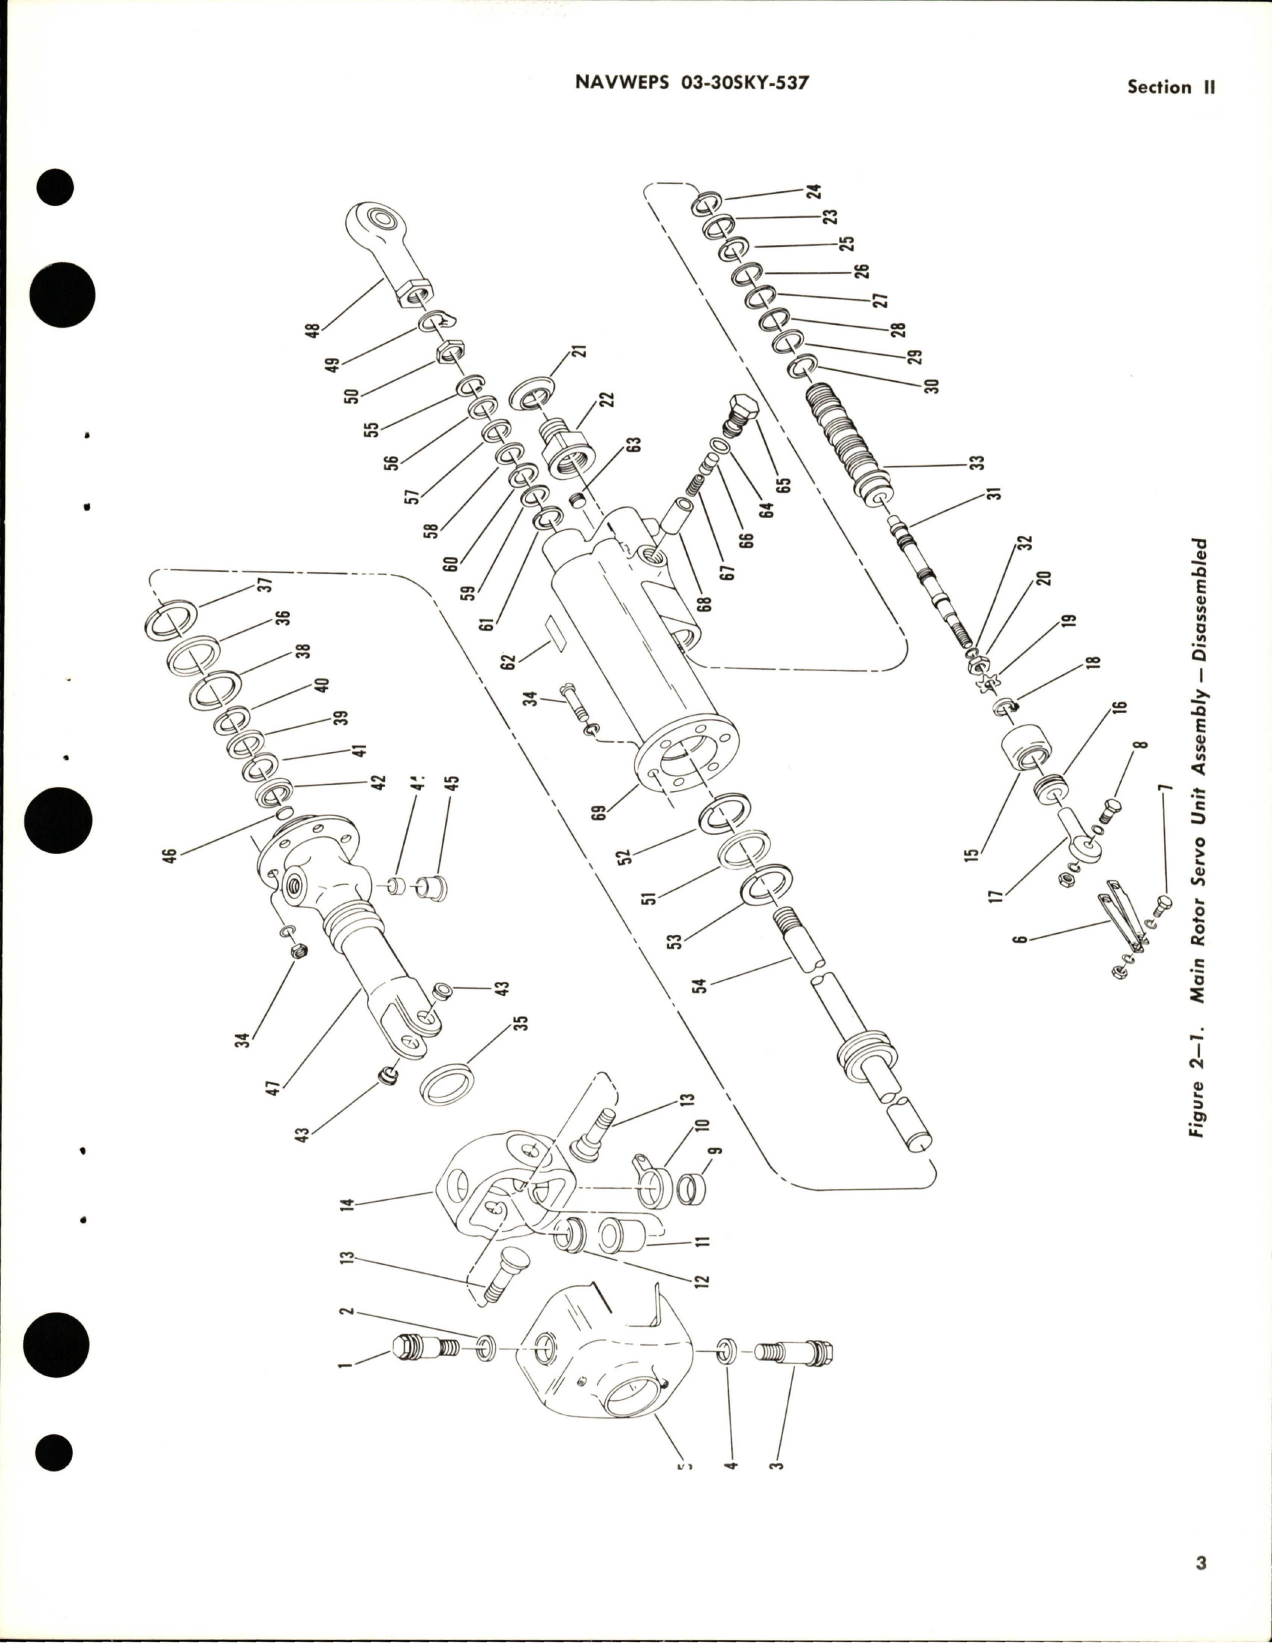 Sample page 7 from AirCorps Library document: Overhaul Instructions for Motor Rotor Servo Unit Assembly - Parts S1665-20003 and S1665-20003-1